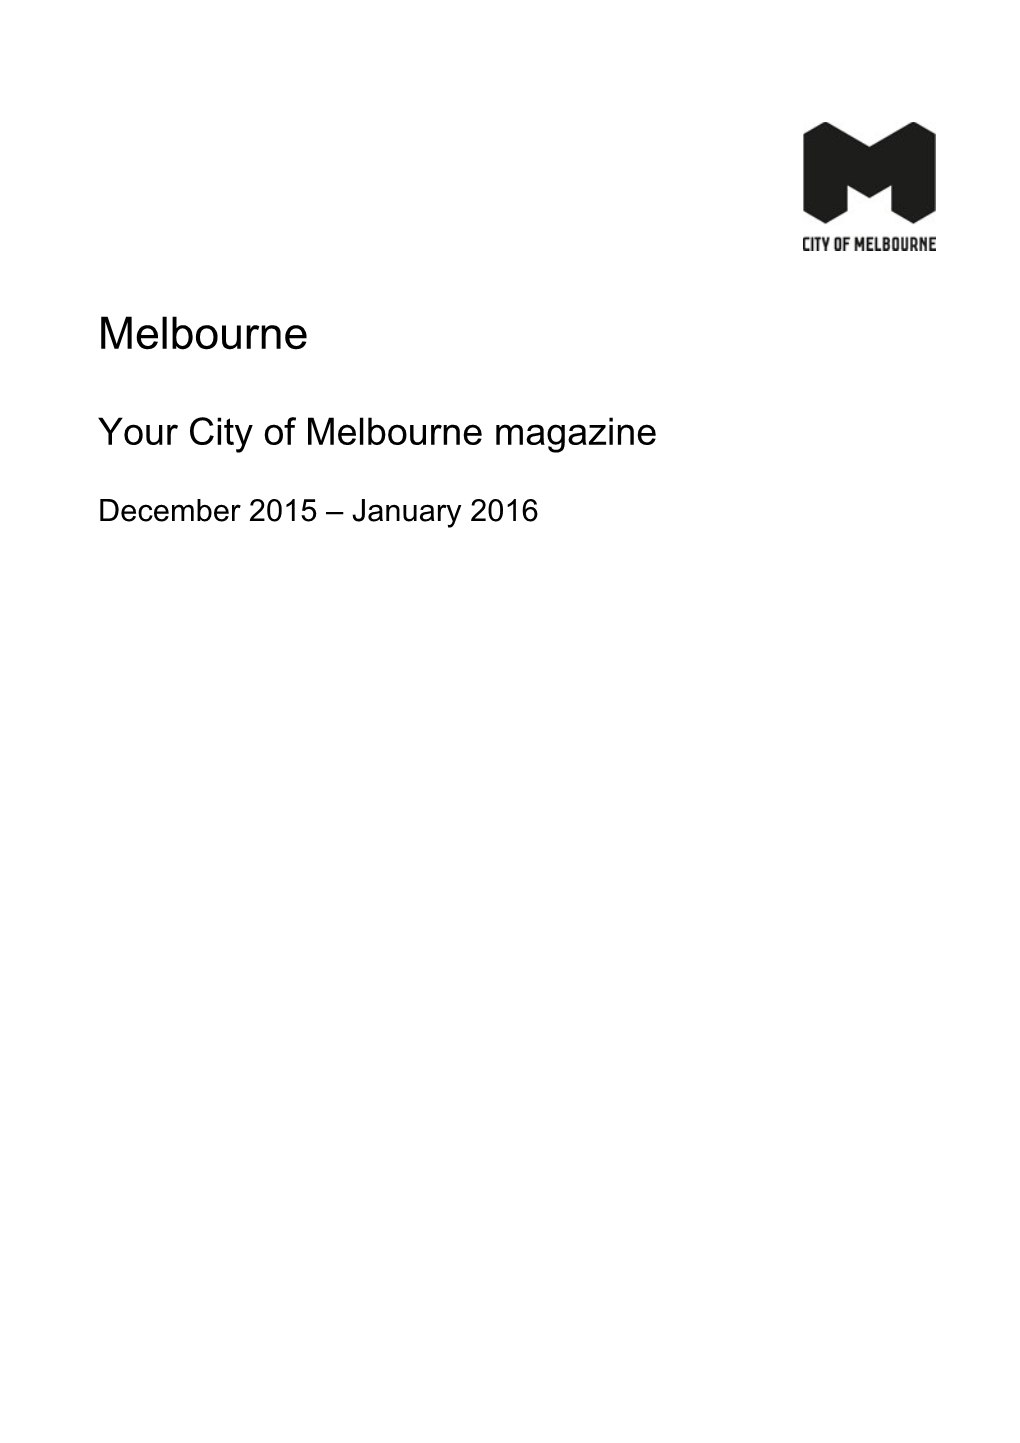 Your City of Melbournemagazine